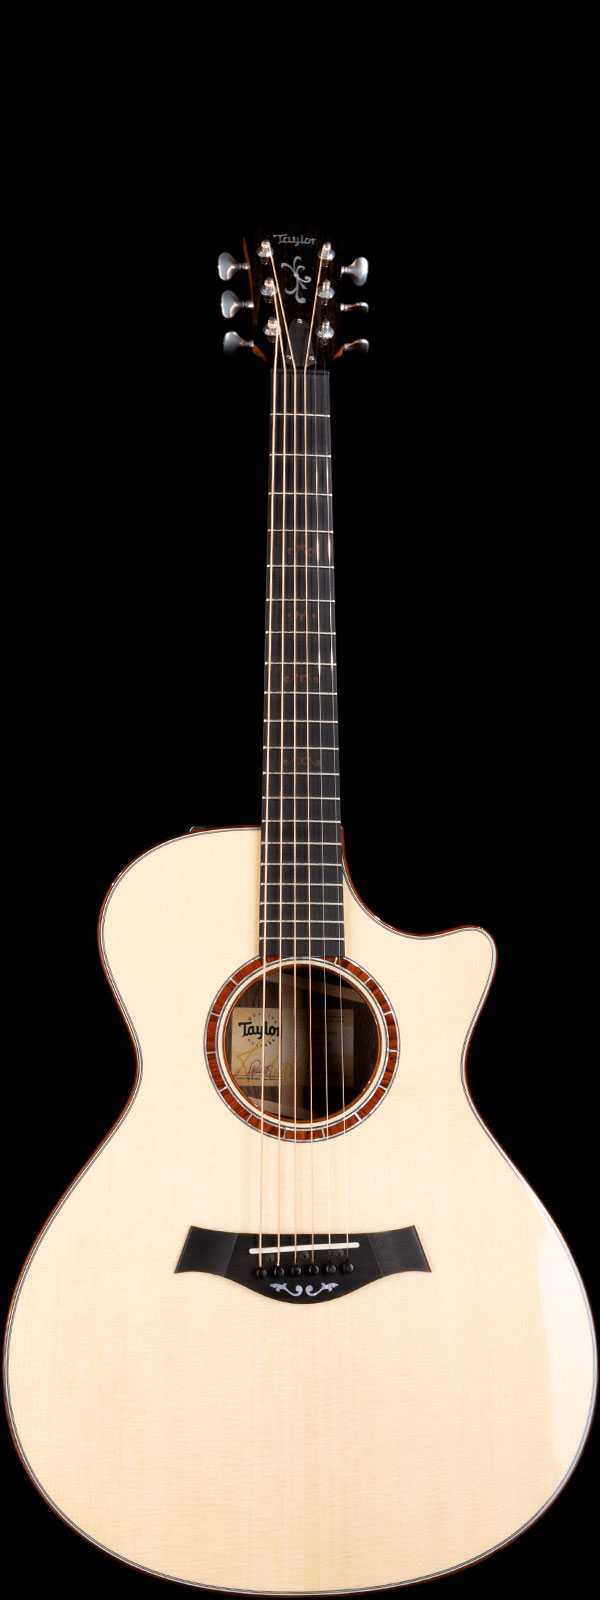 Taylor Custom GC Grand Concert 24 Acoustic-Electric Lutz Spruce Top Ebony Board Natural